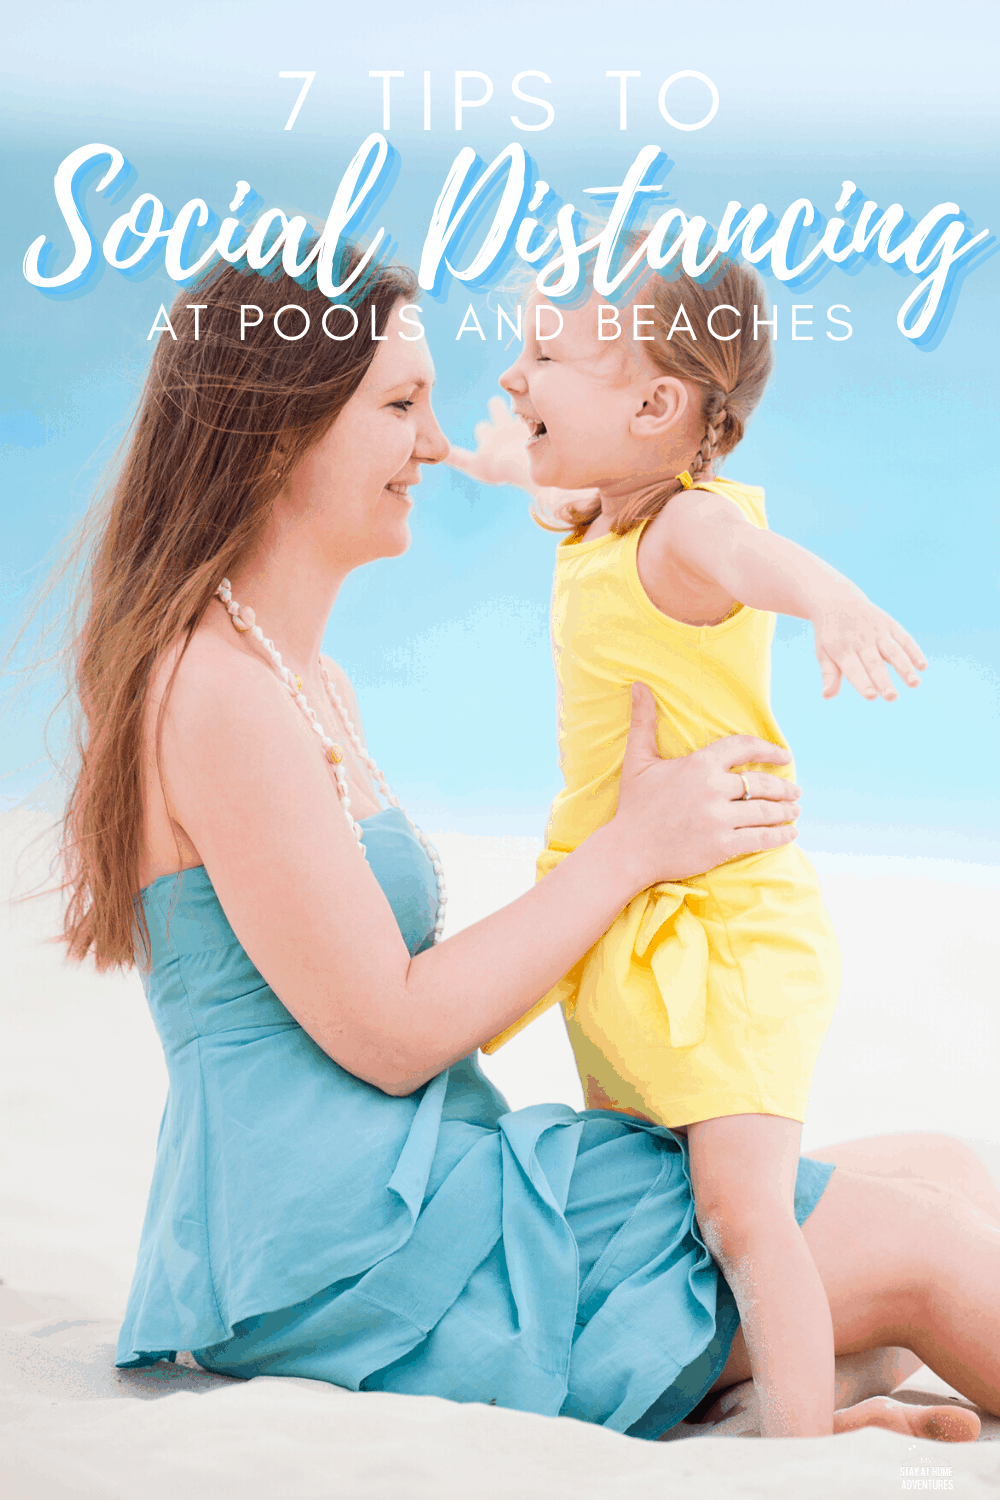 You are going to learn what are the best practices when it comes to social distancing at pools and beaches from what to do at pools and what not to do. #pool #beach #summertips #socialdistancing via @mystayathome